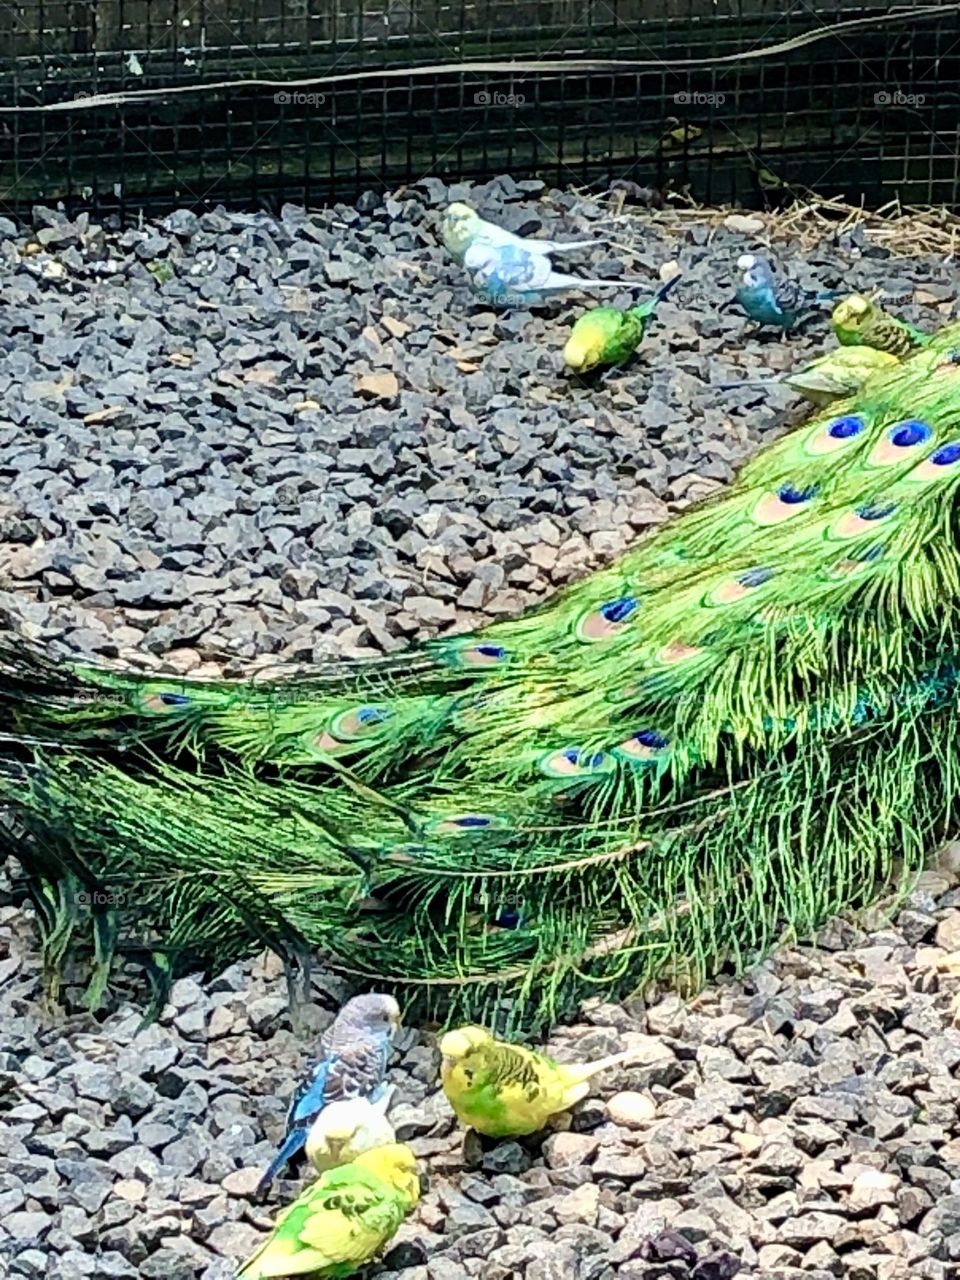 Amazing feathers oft the Peacock bird & Parquets also together at the zoo 🌿🦜🦚🦜     🪶